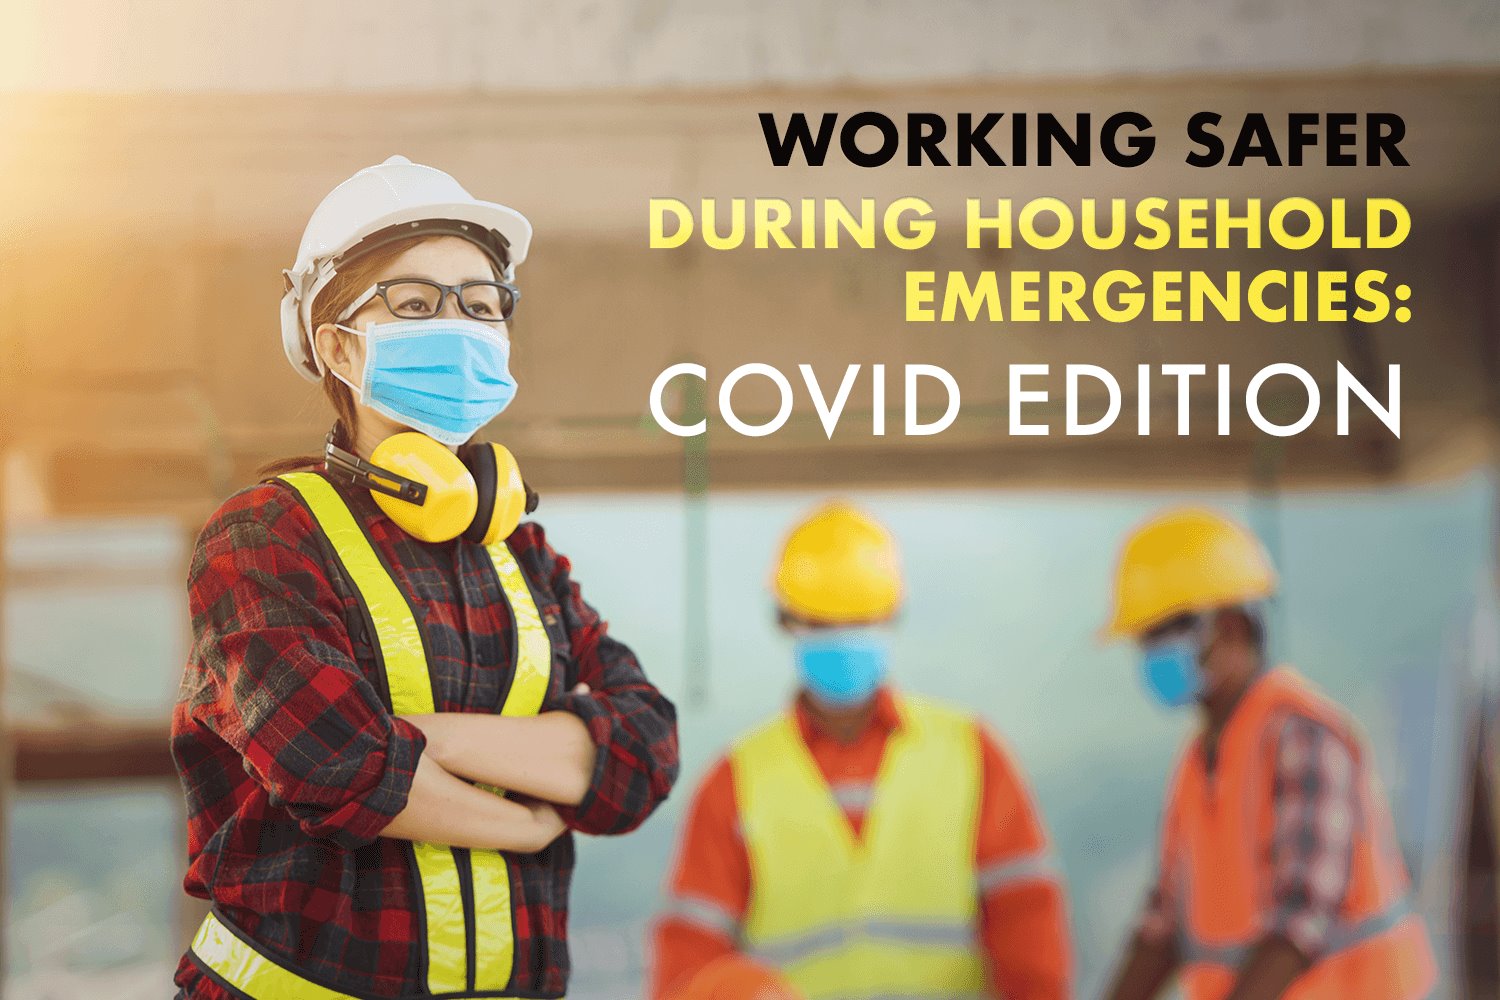 How to deal with household emergencies during the covid 19 crisis?